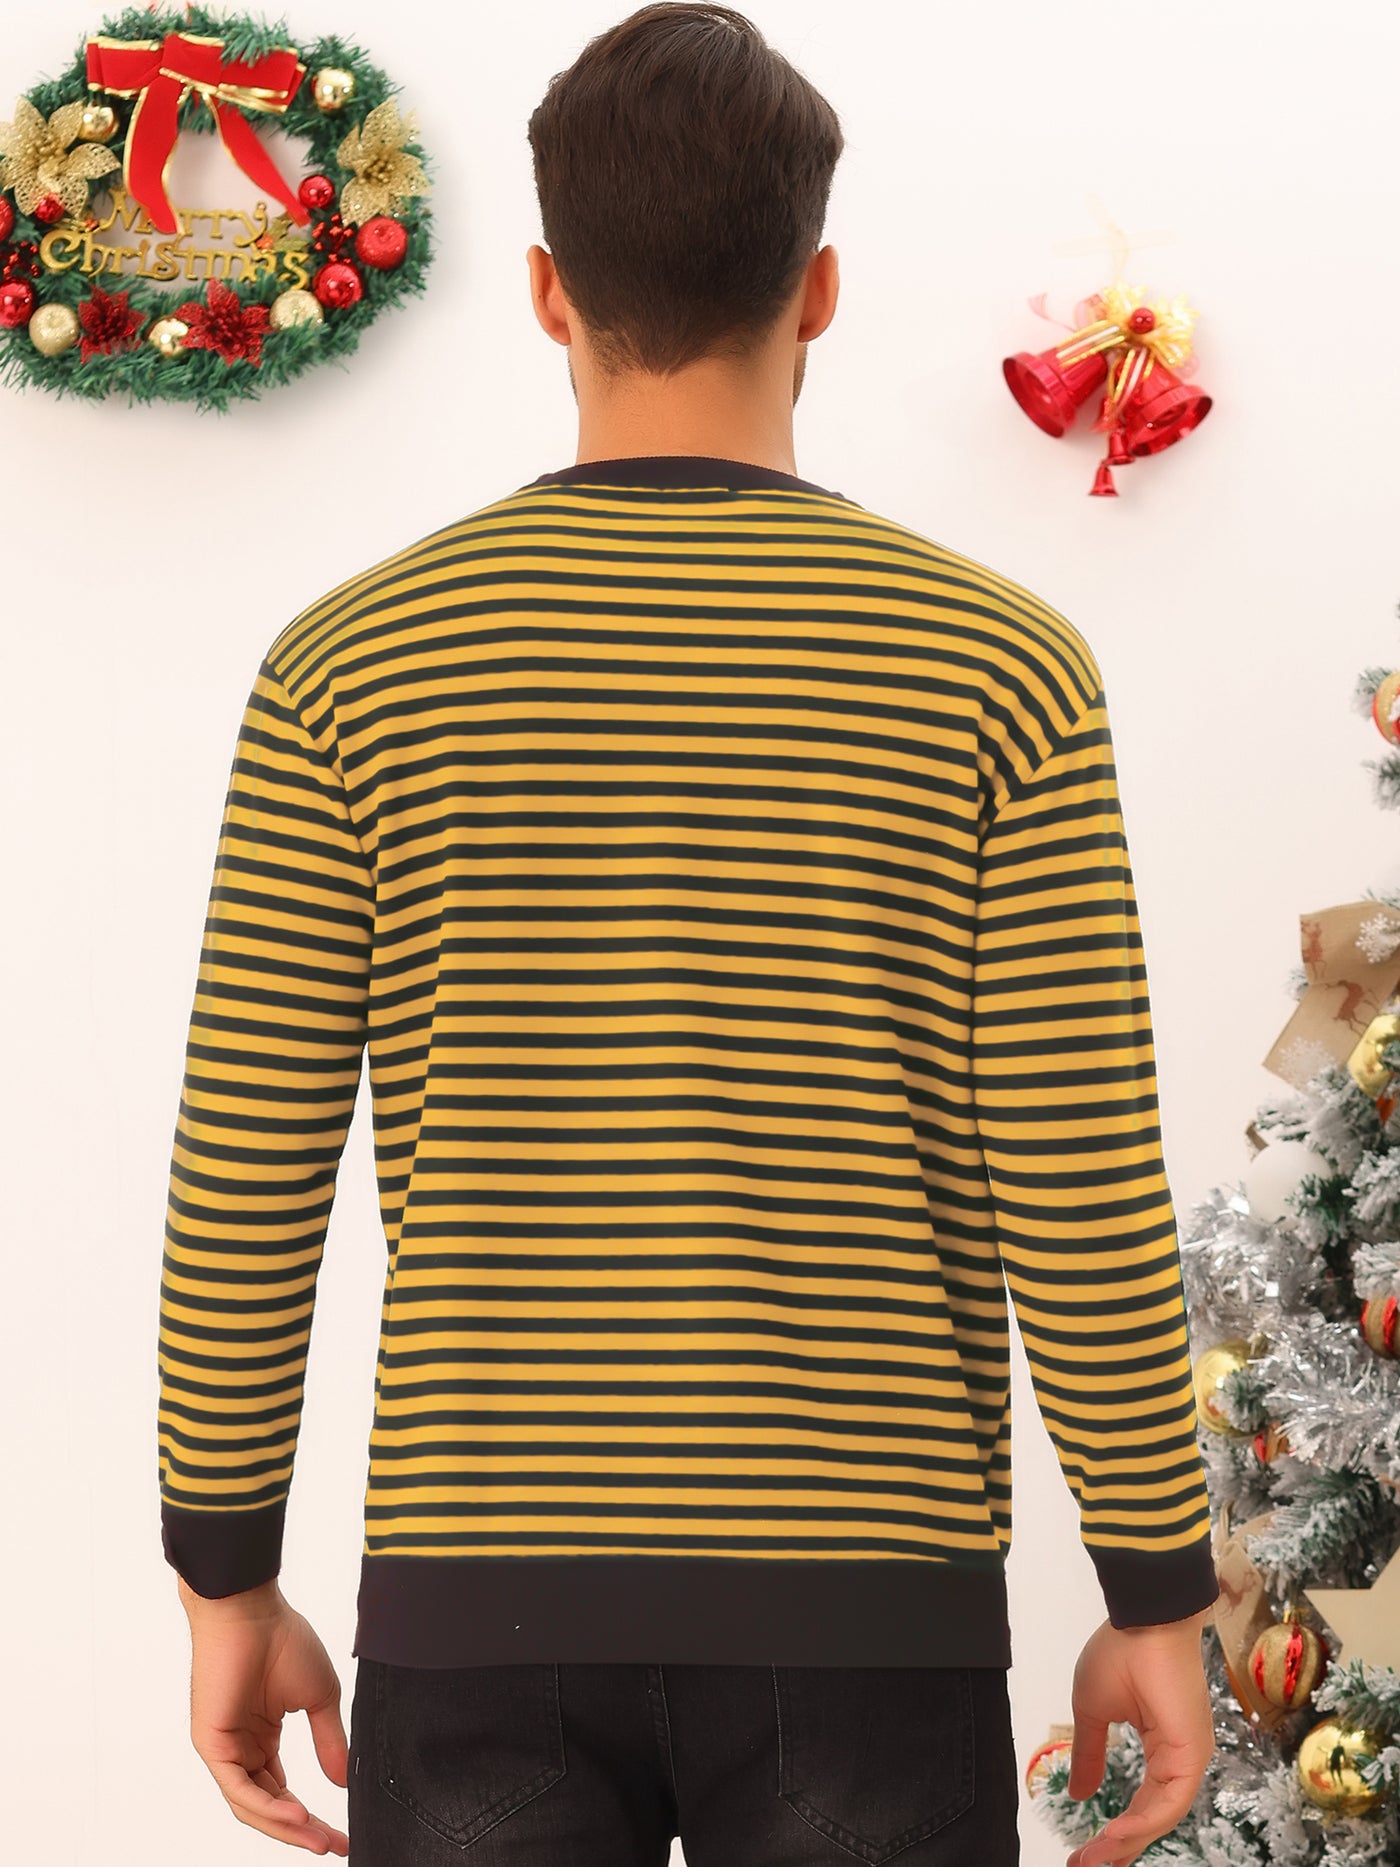 Bublédon Striped Sweaters for Men's Long Sleeves Round Neck Color Block Knit Top Pullover